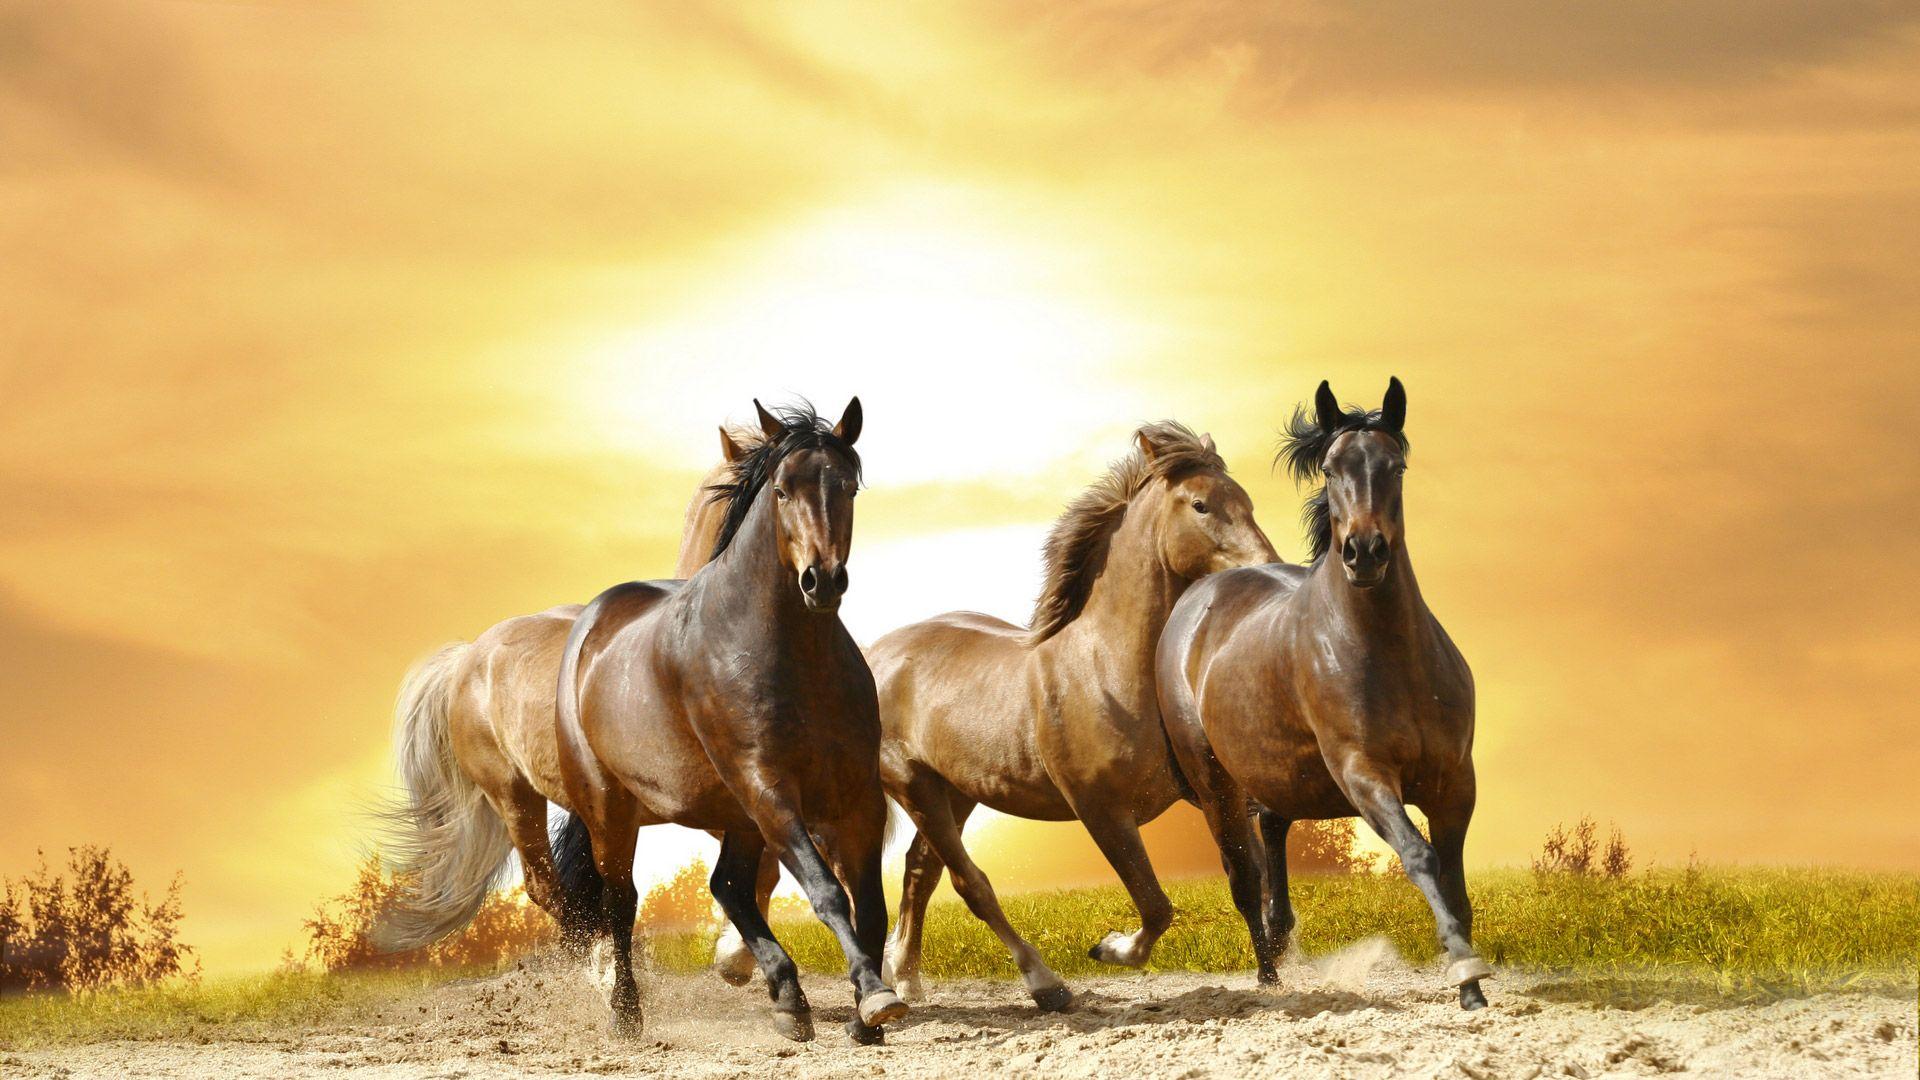 Running Horses Wallpaper HD (Picture)